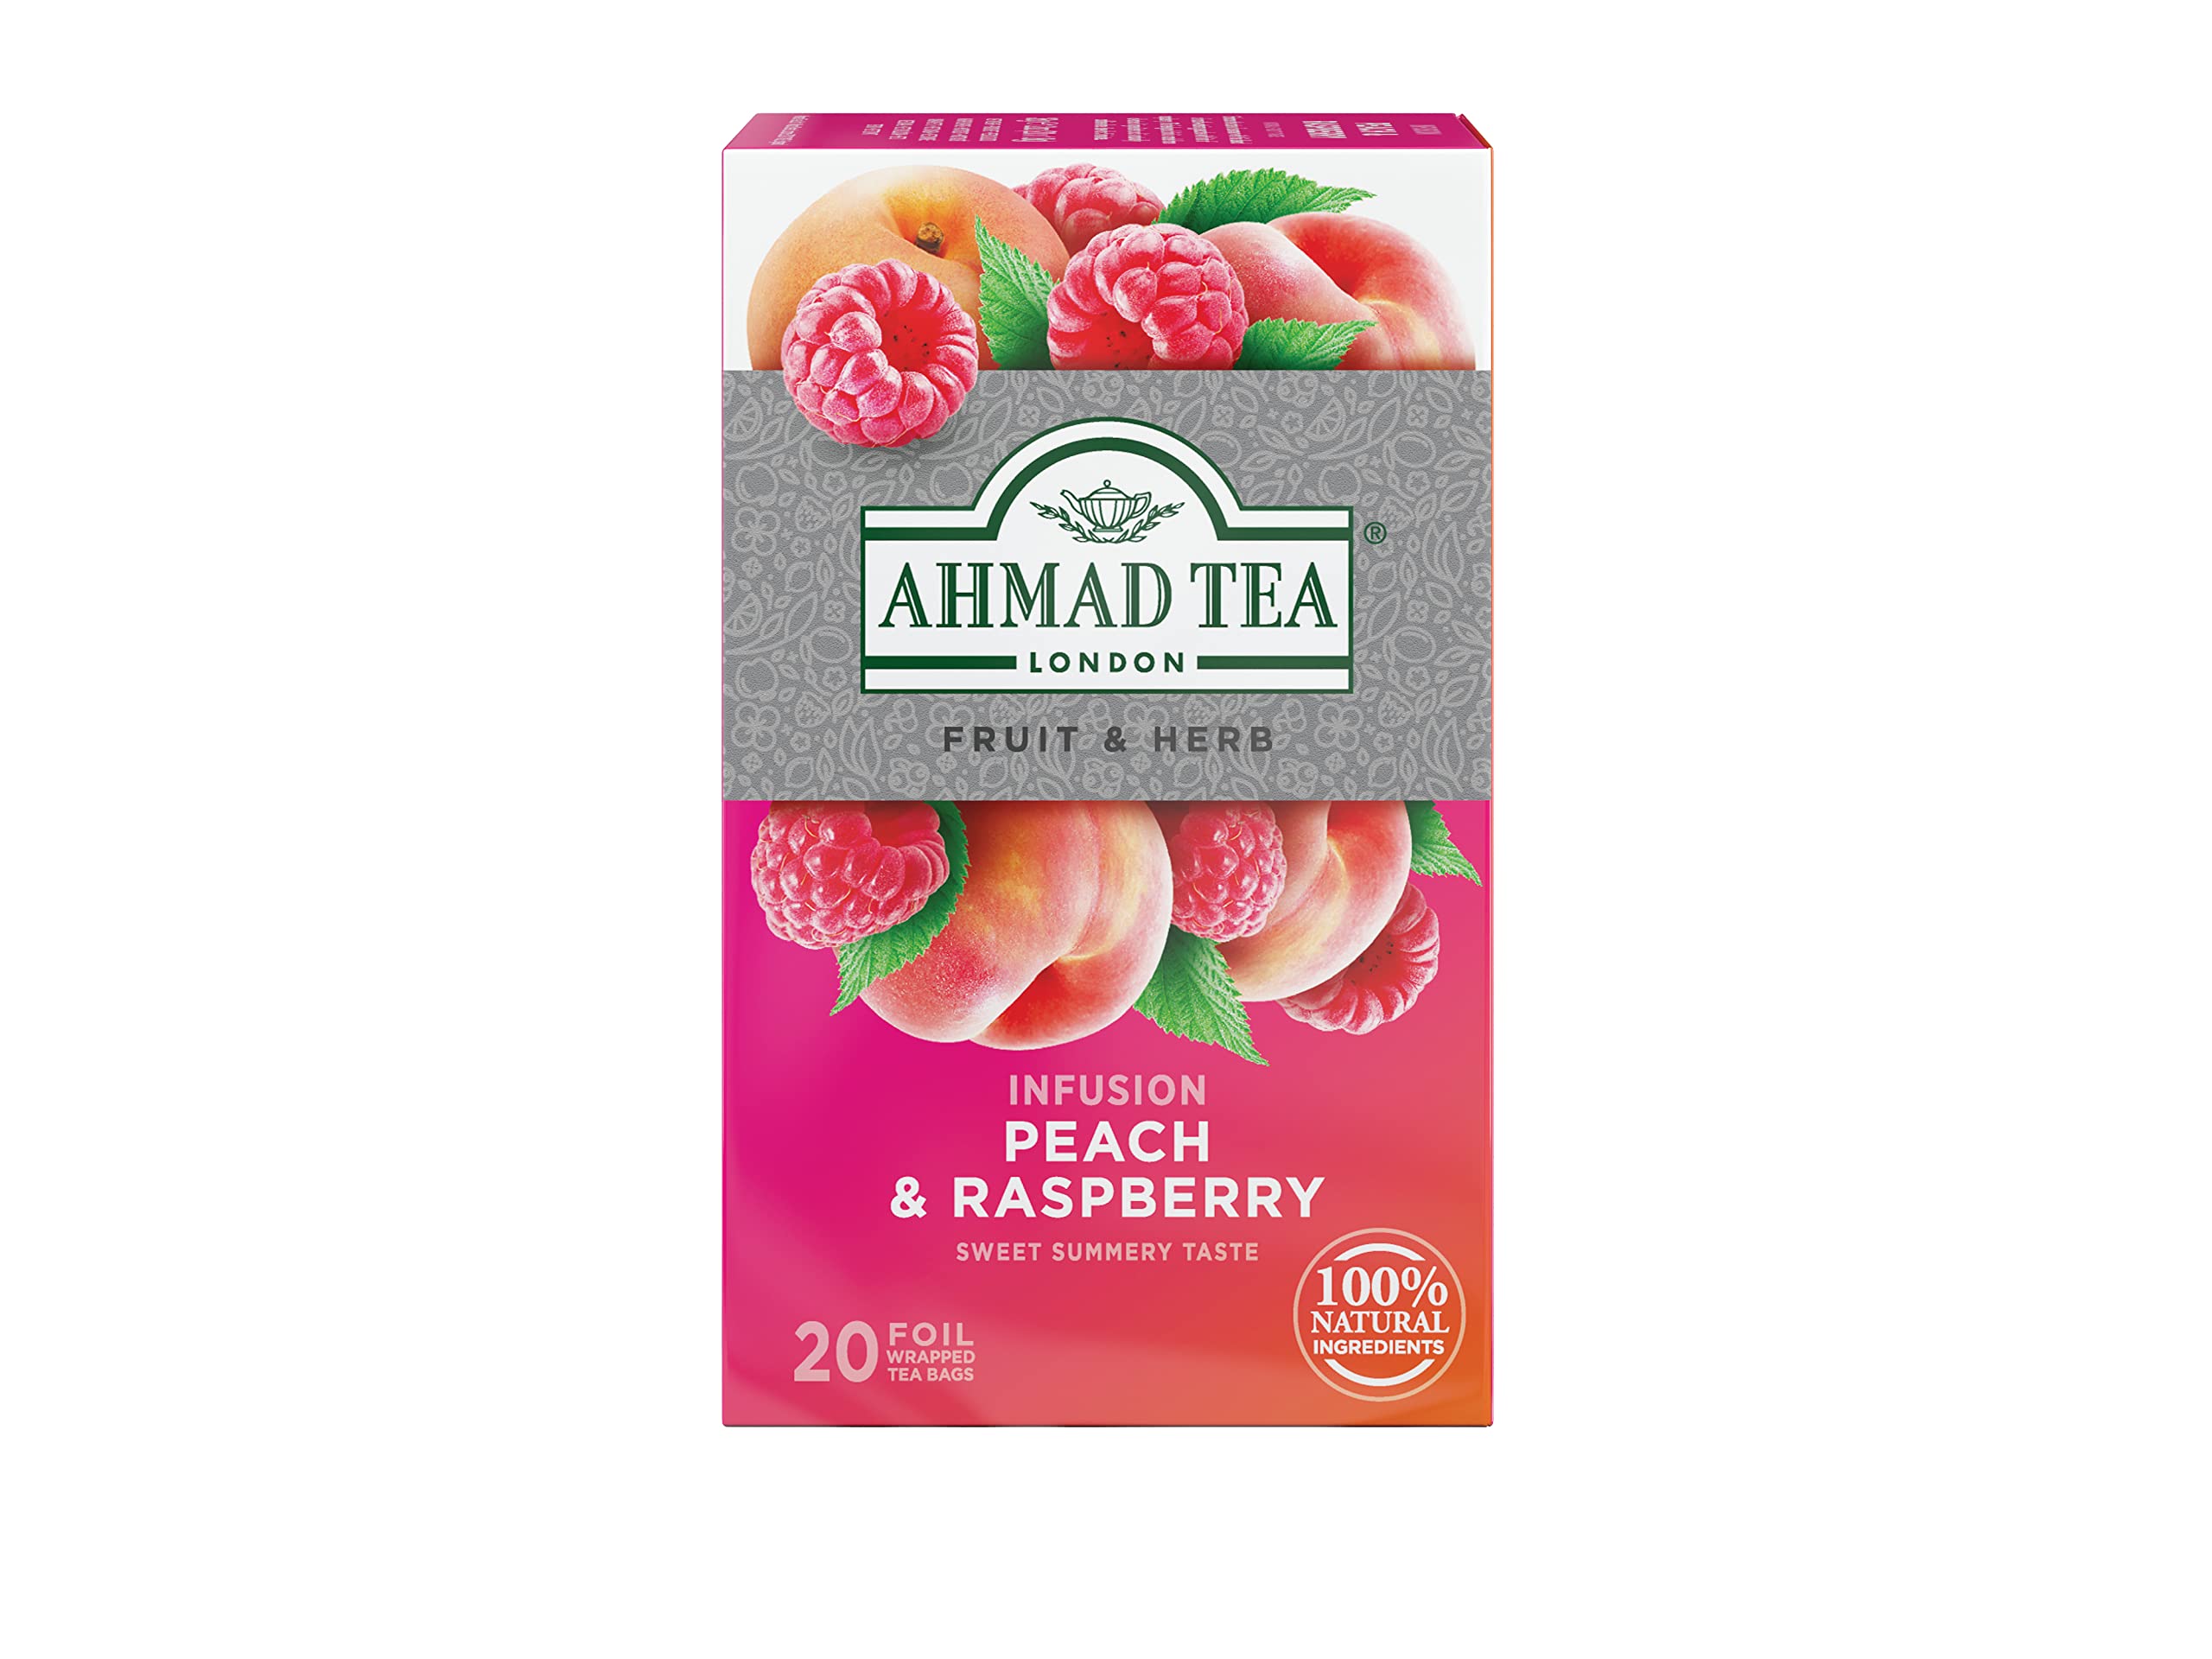 Ahmad Tea Infusions, Peach and Raspberry Teabags, 20 ct (Pack of 1) - Decaffeinated & Sugar-Free